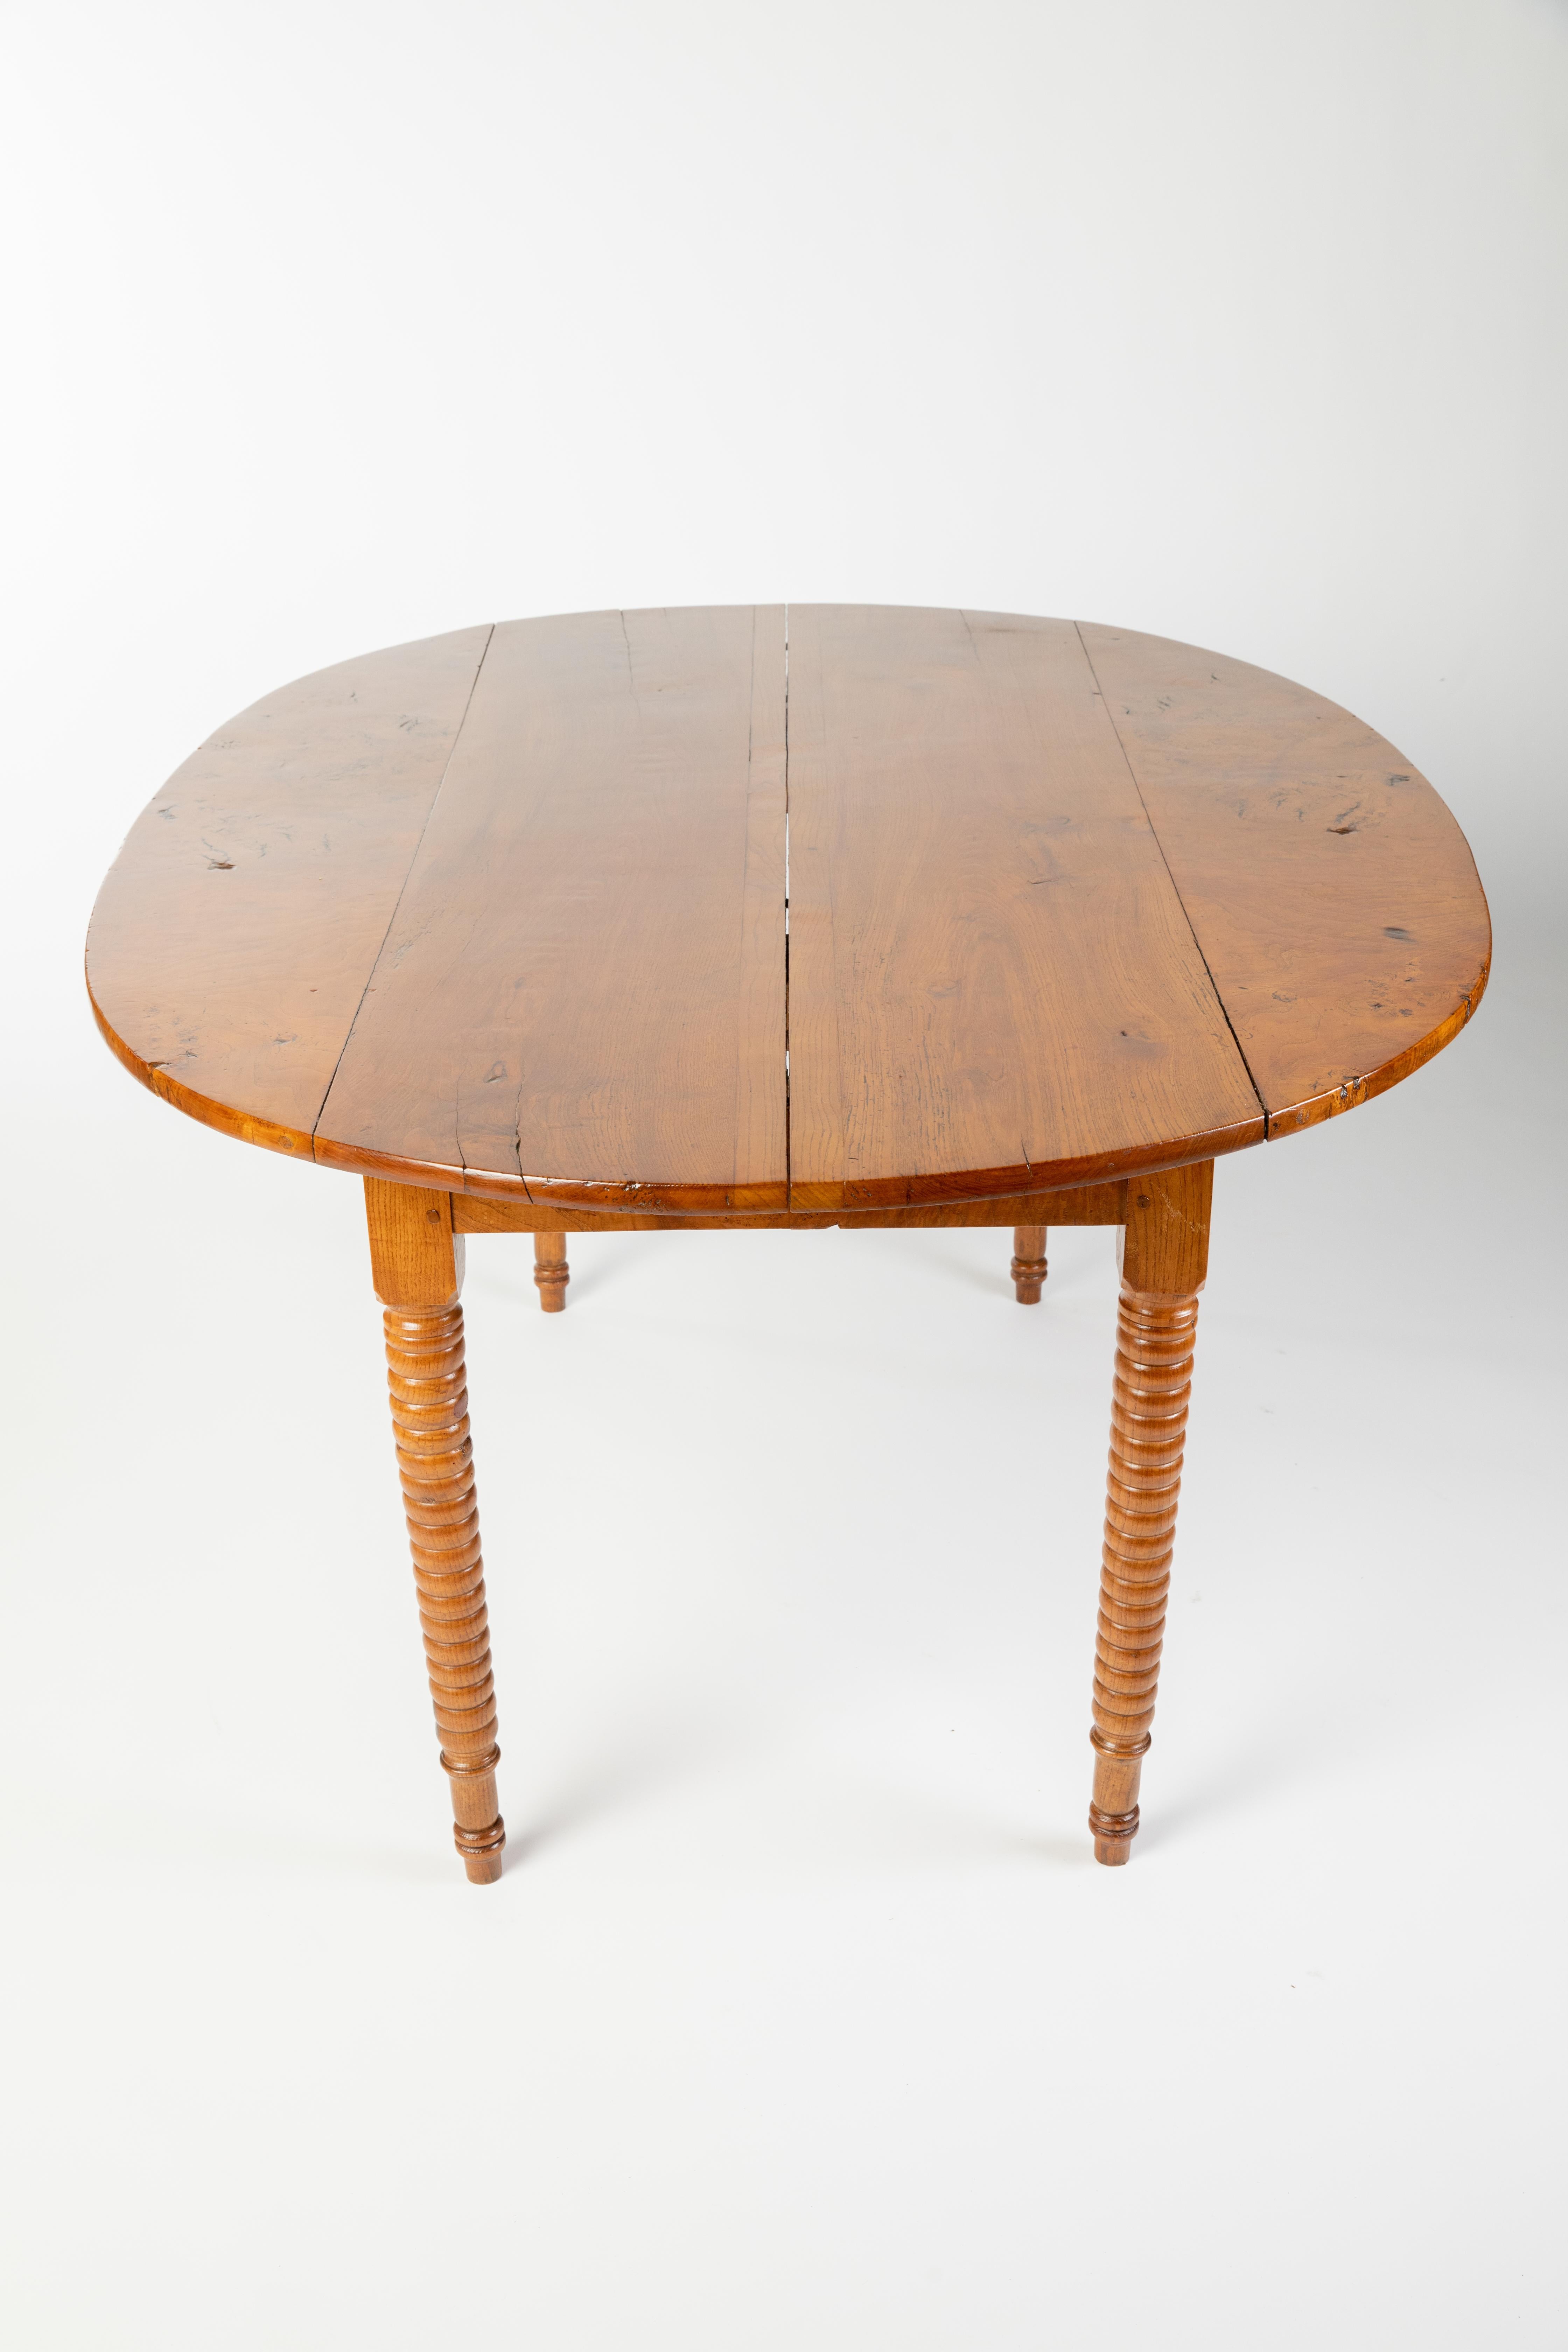 19th Century Rustic French Mixed Wood Farmhouse Table For Sale